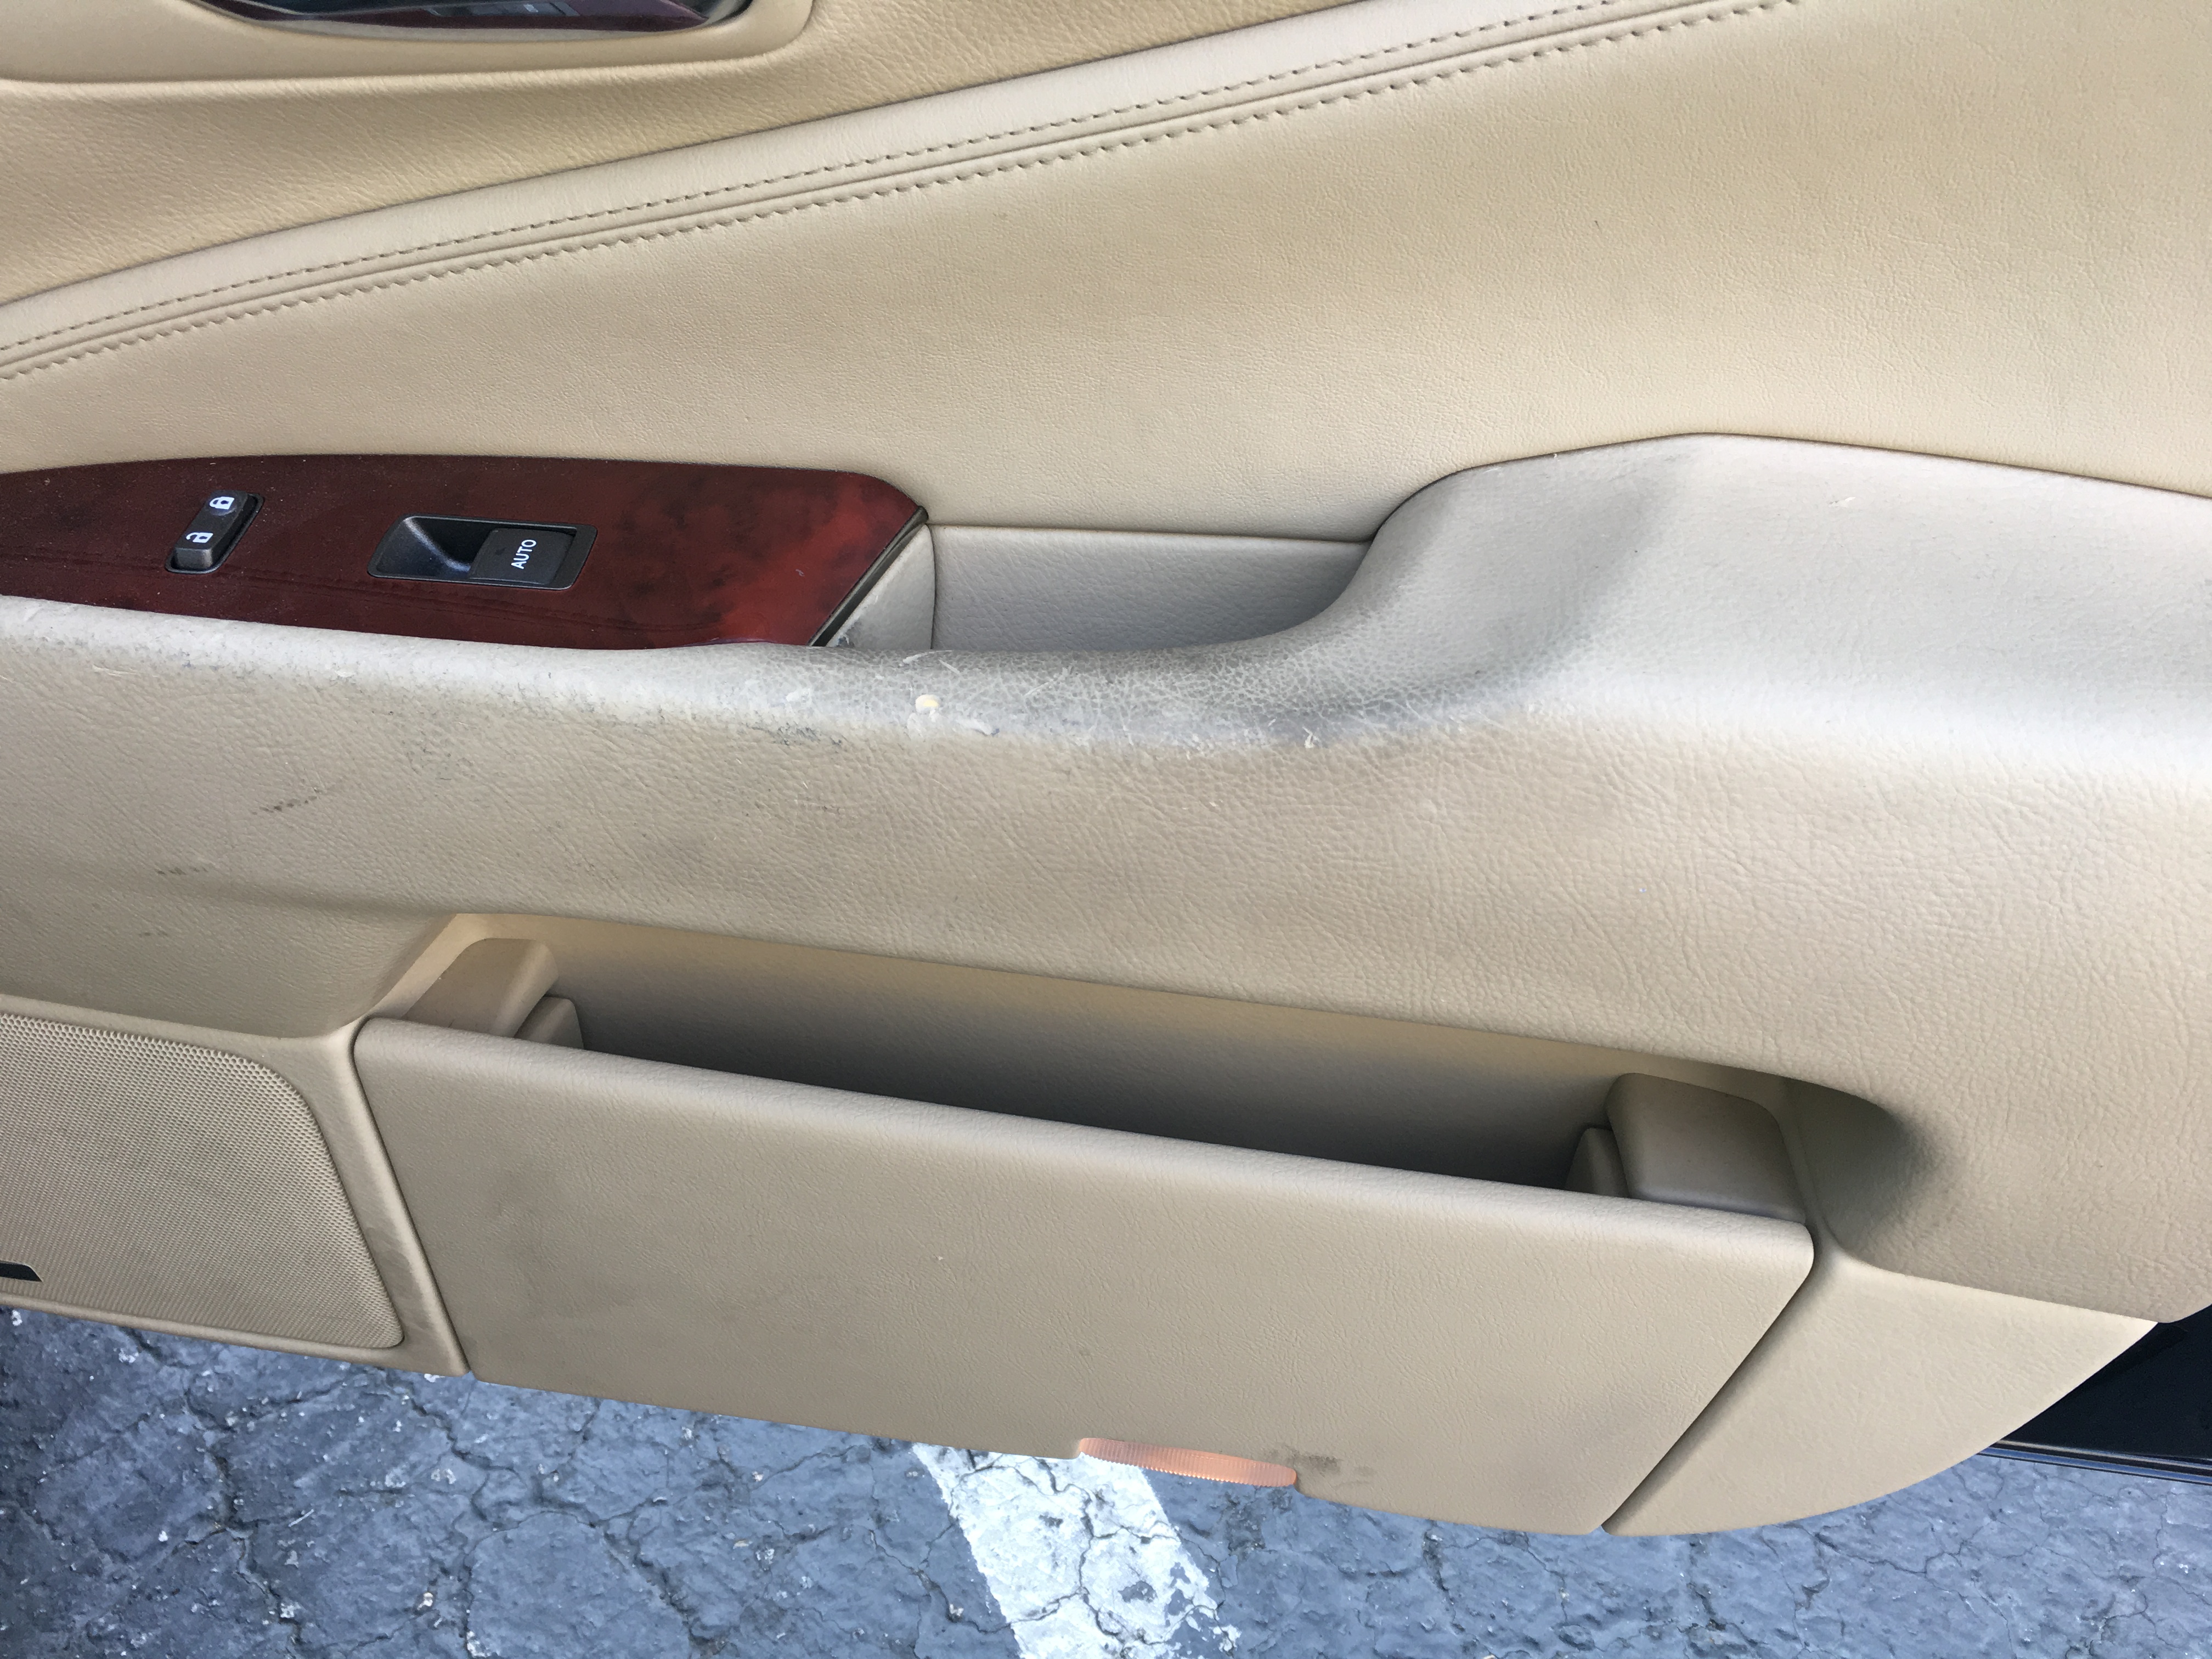 I Have 2007 Ls460 With Sticky And Cracked Door Panels And Dash Page 3 Clublexus Lexus Forum Discussion